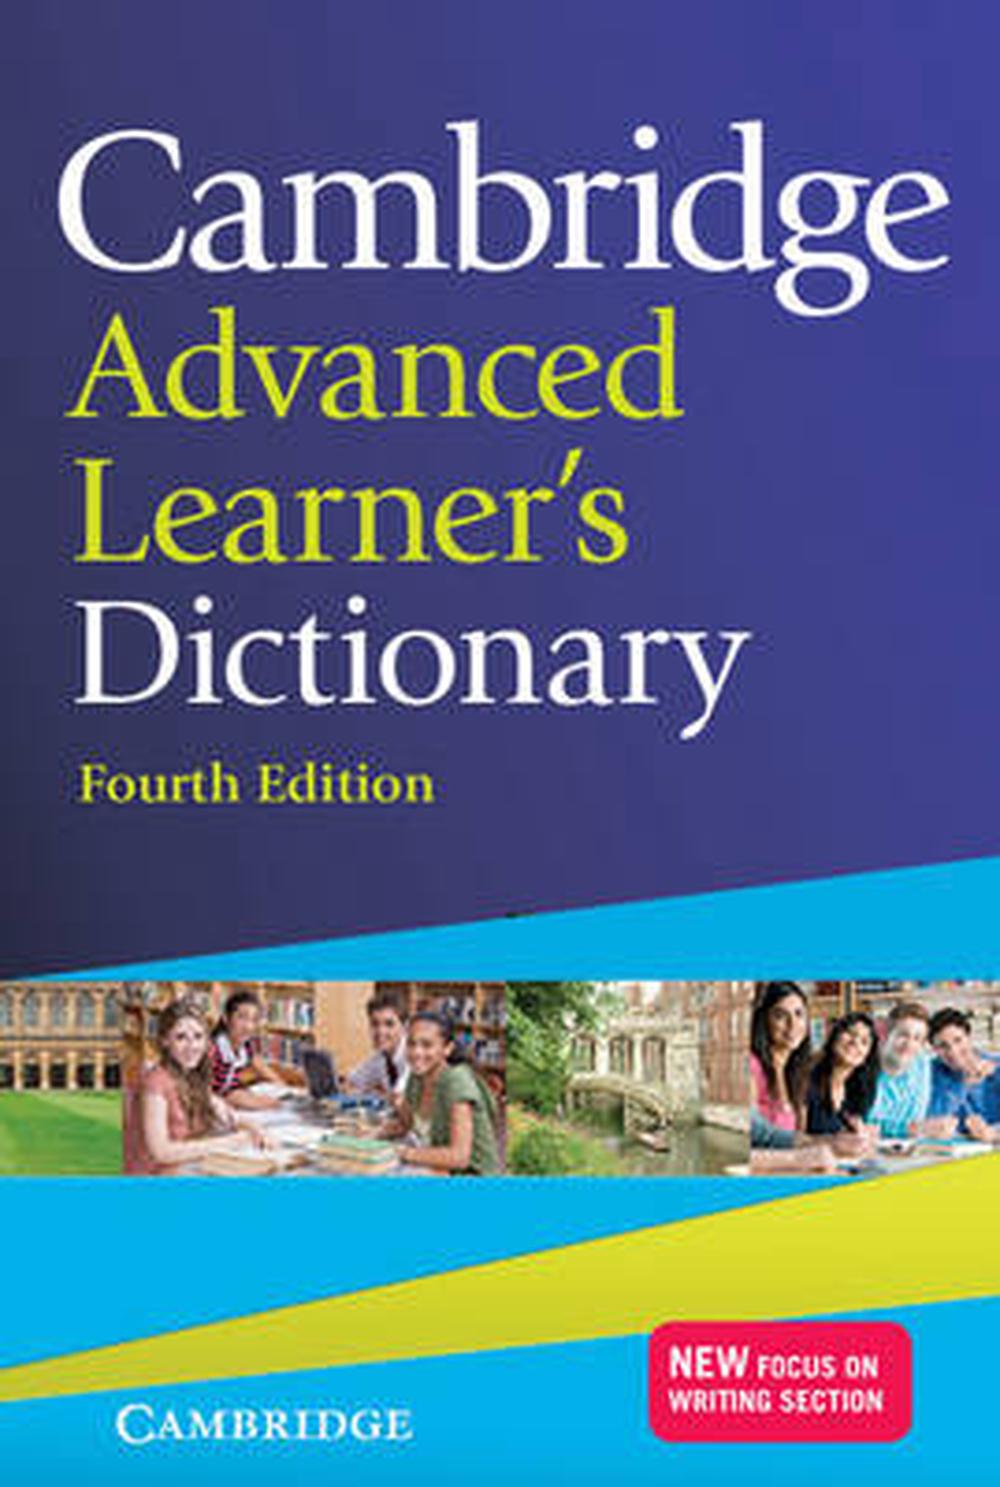 cambridge advanced learners dictionary free download for mac